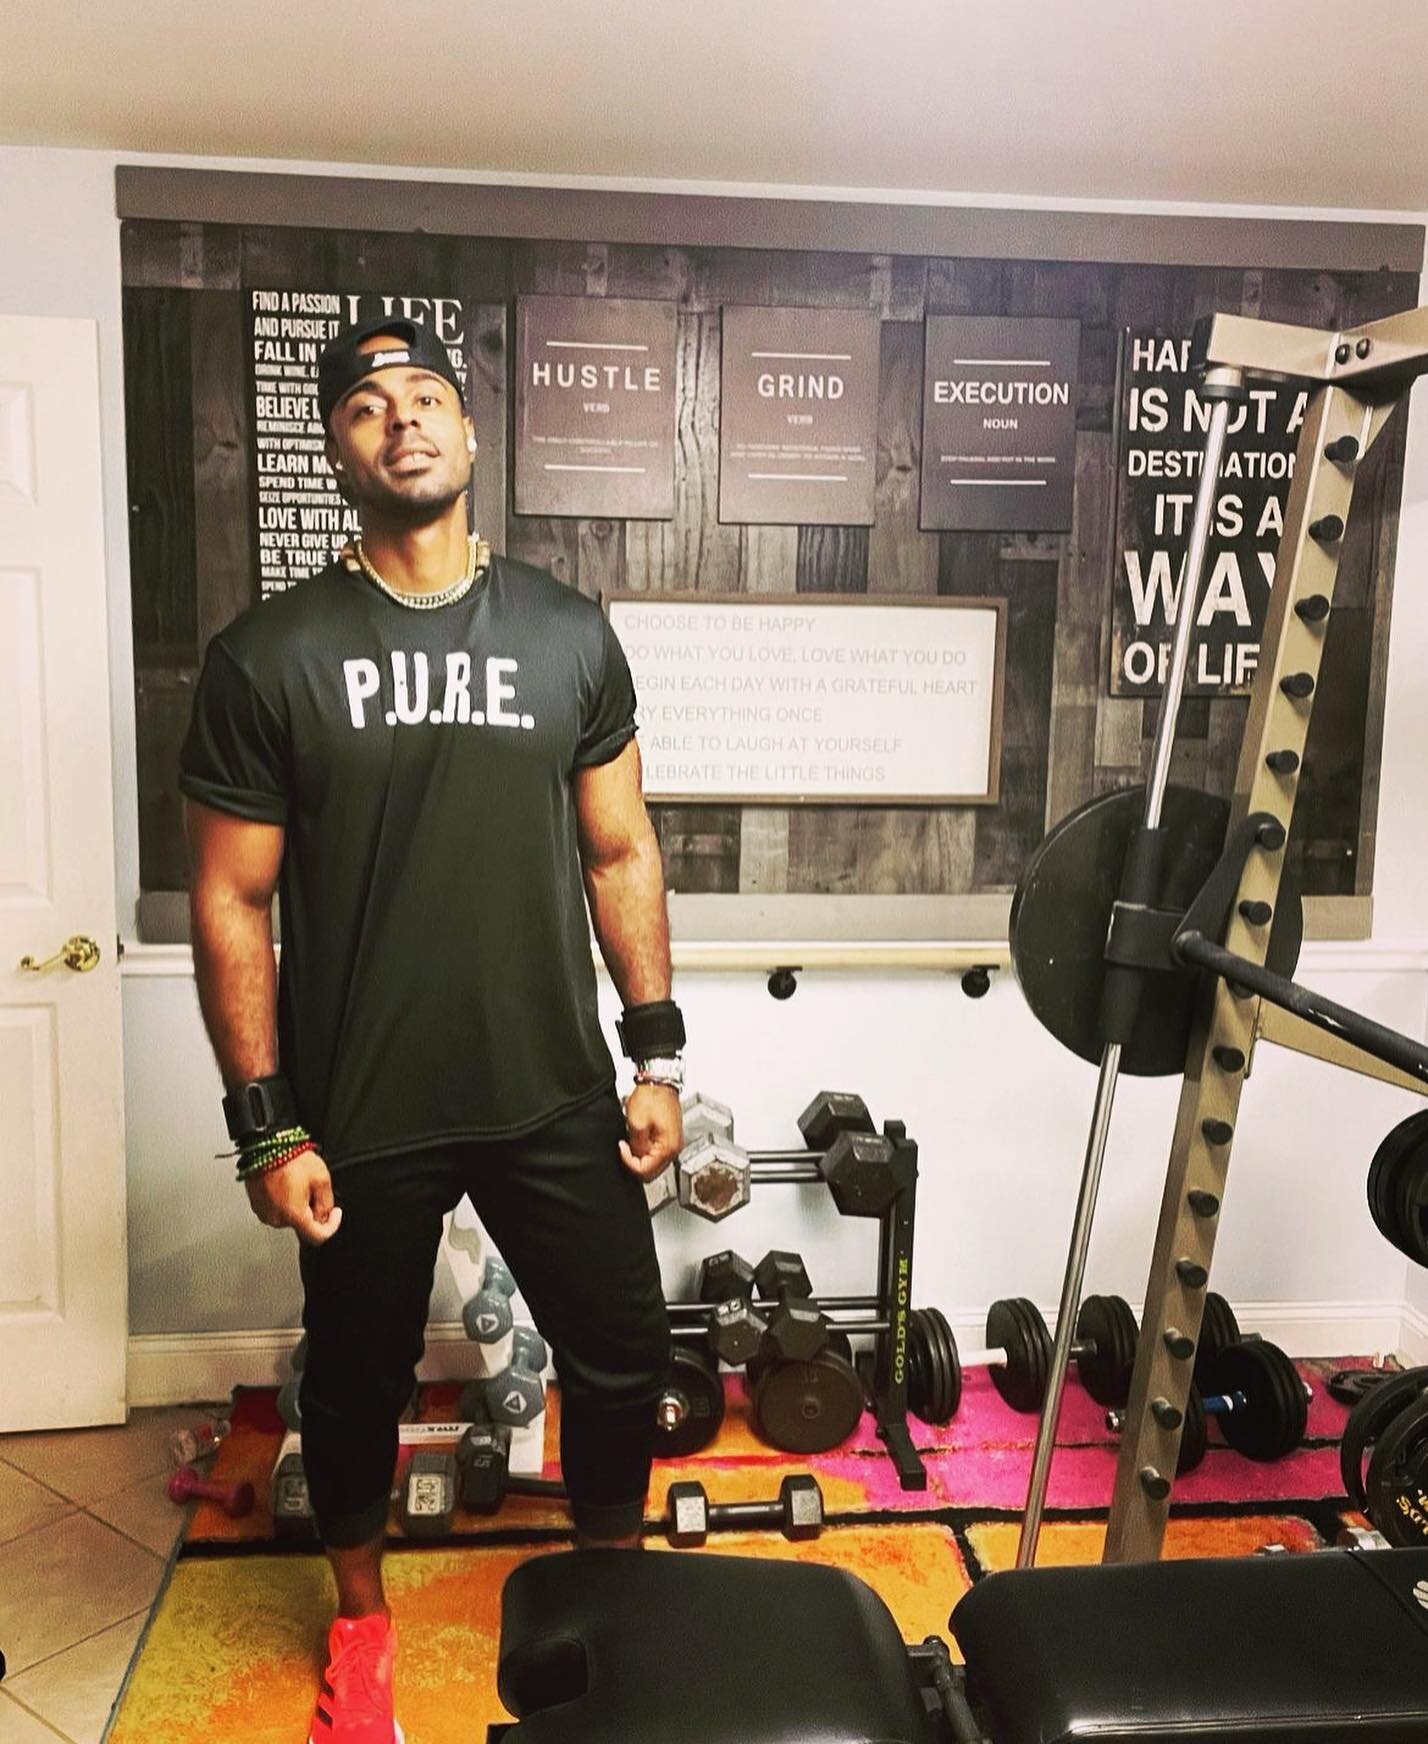 My brother Joseph embodies what P.U.R.E. apparel stands for &mdash; 
P - Staying PERSISTENT 
U - Getting UNCOMFORTABLE 
R - RESISTING negativity 
E - Pouring good ENERGY back in

Thank you for your support, bro. @jcun20 @p.u.r.e.threads ❤️❤️❤️

#stay